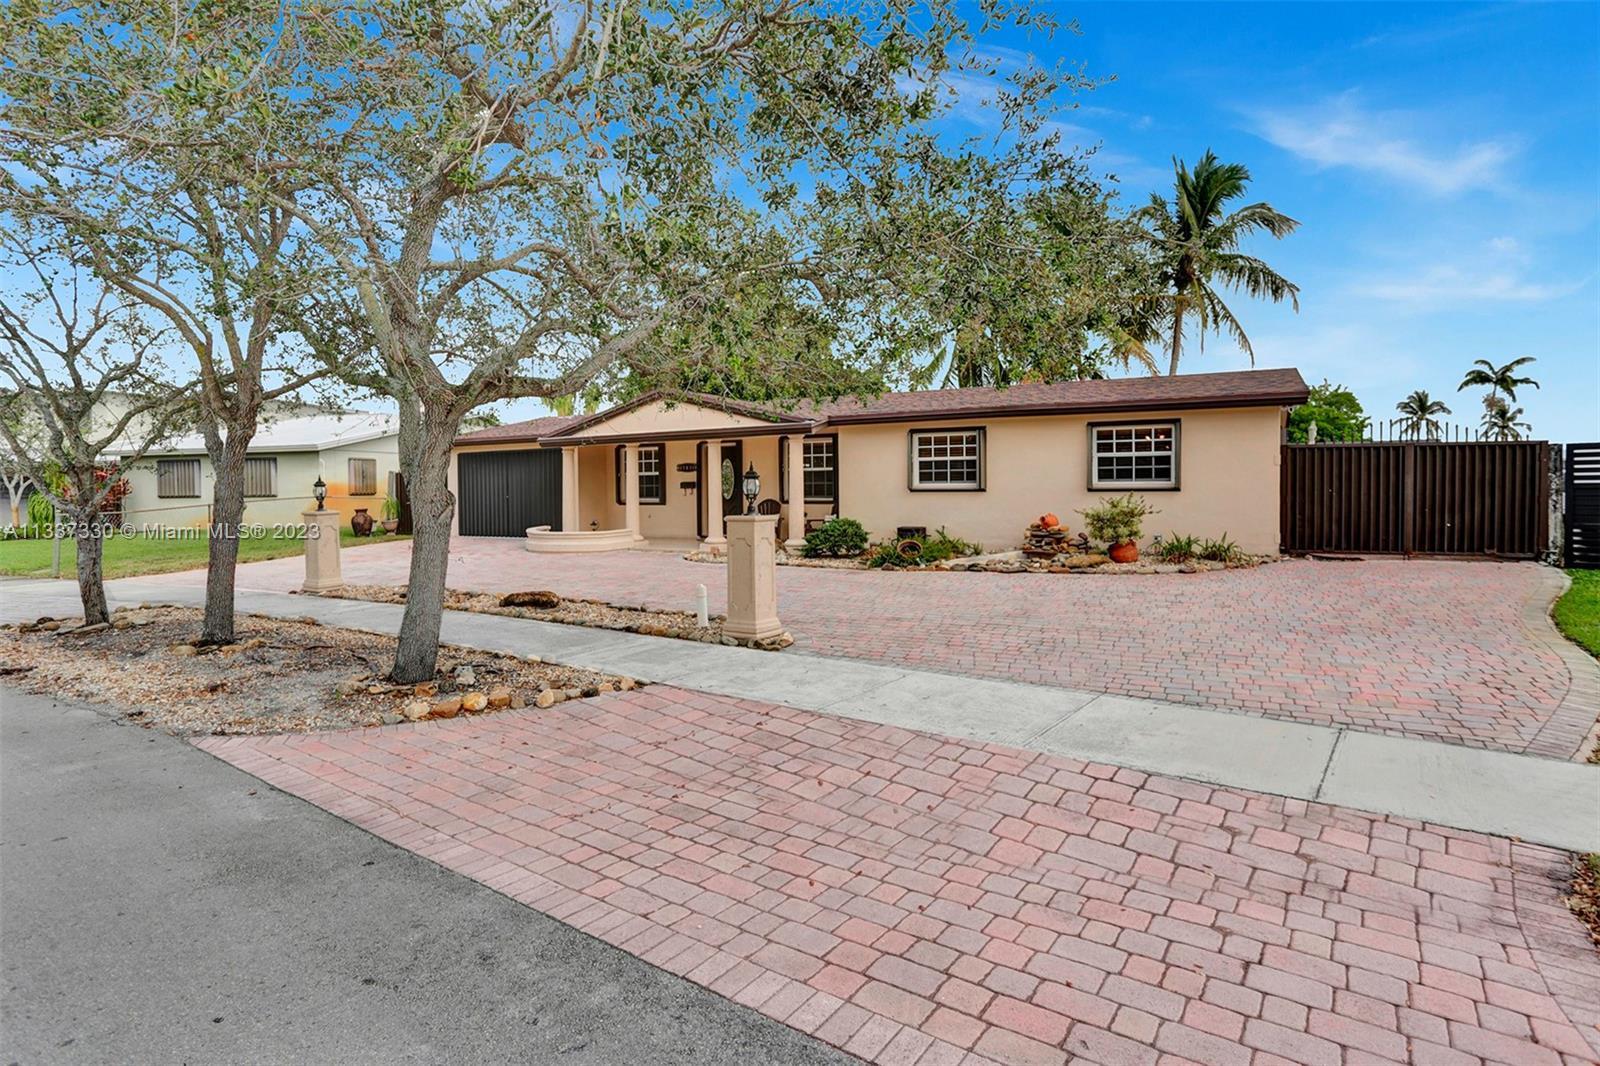 This is your opportunity to own a spacious home in the coveted neighborhood of Palm Springs North. T